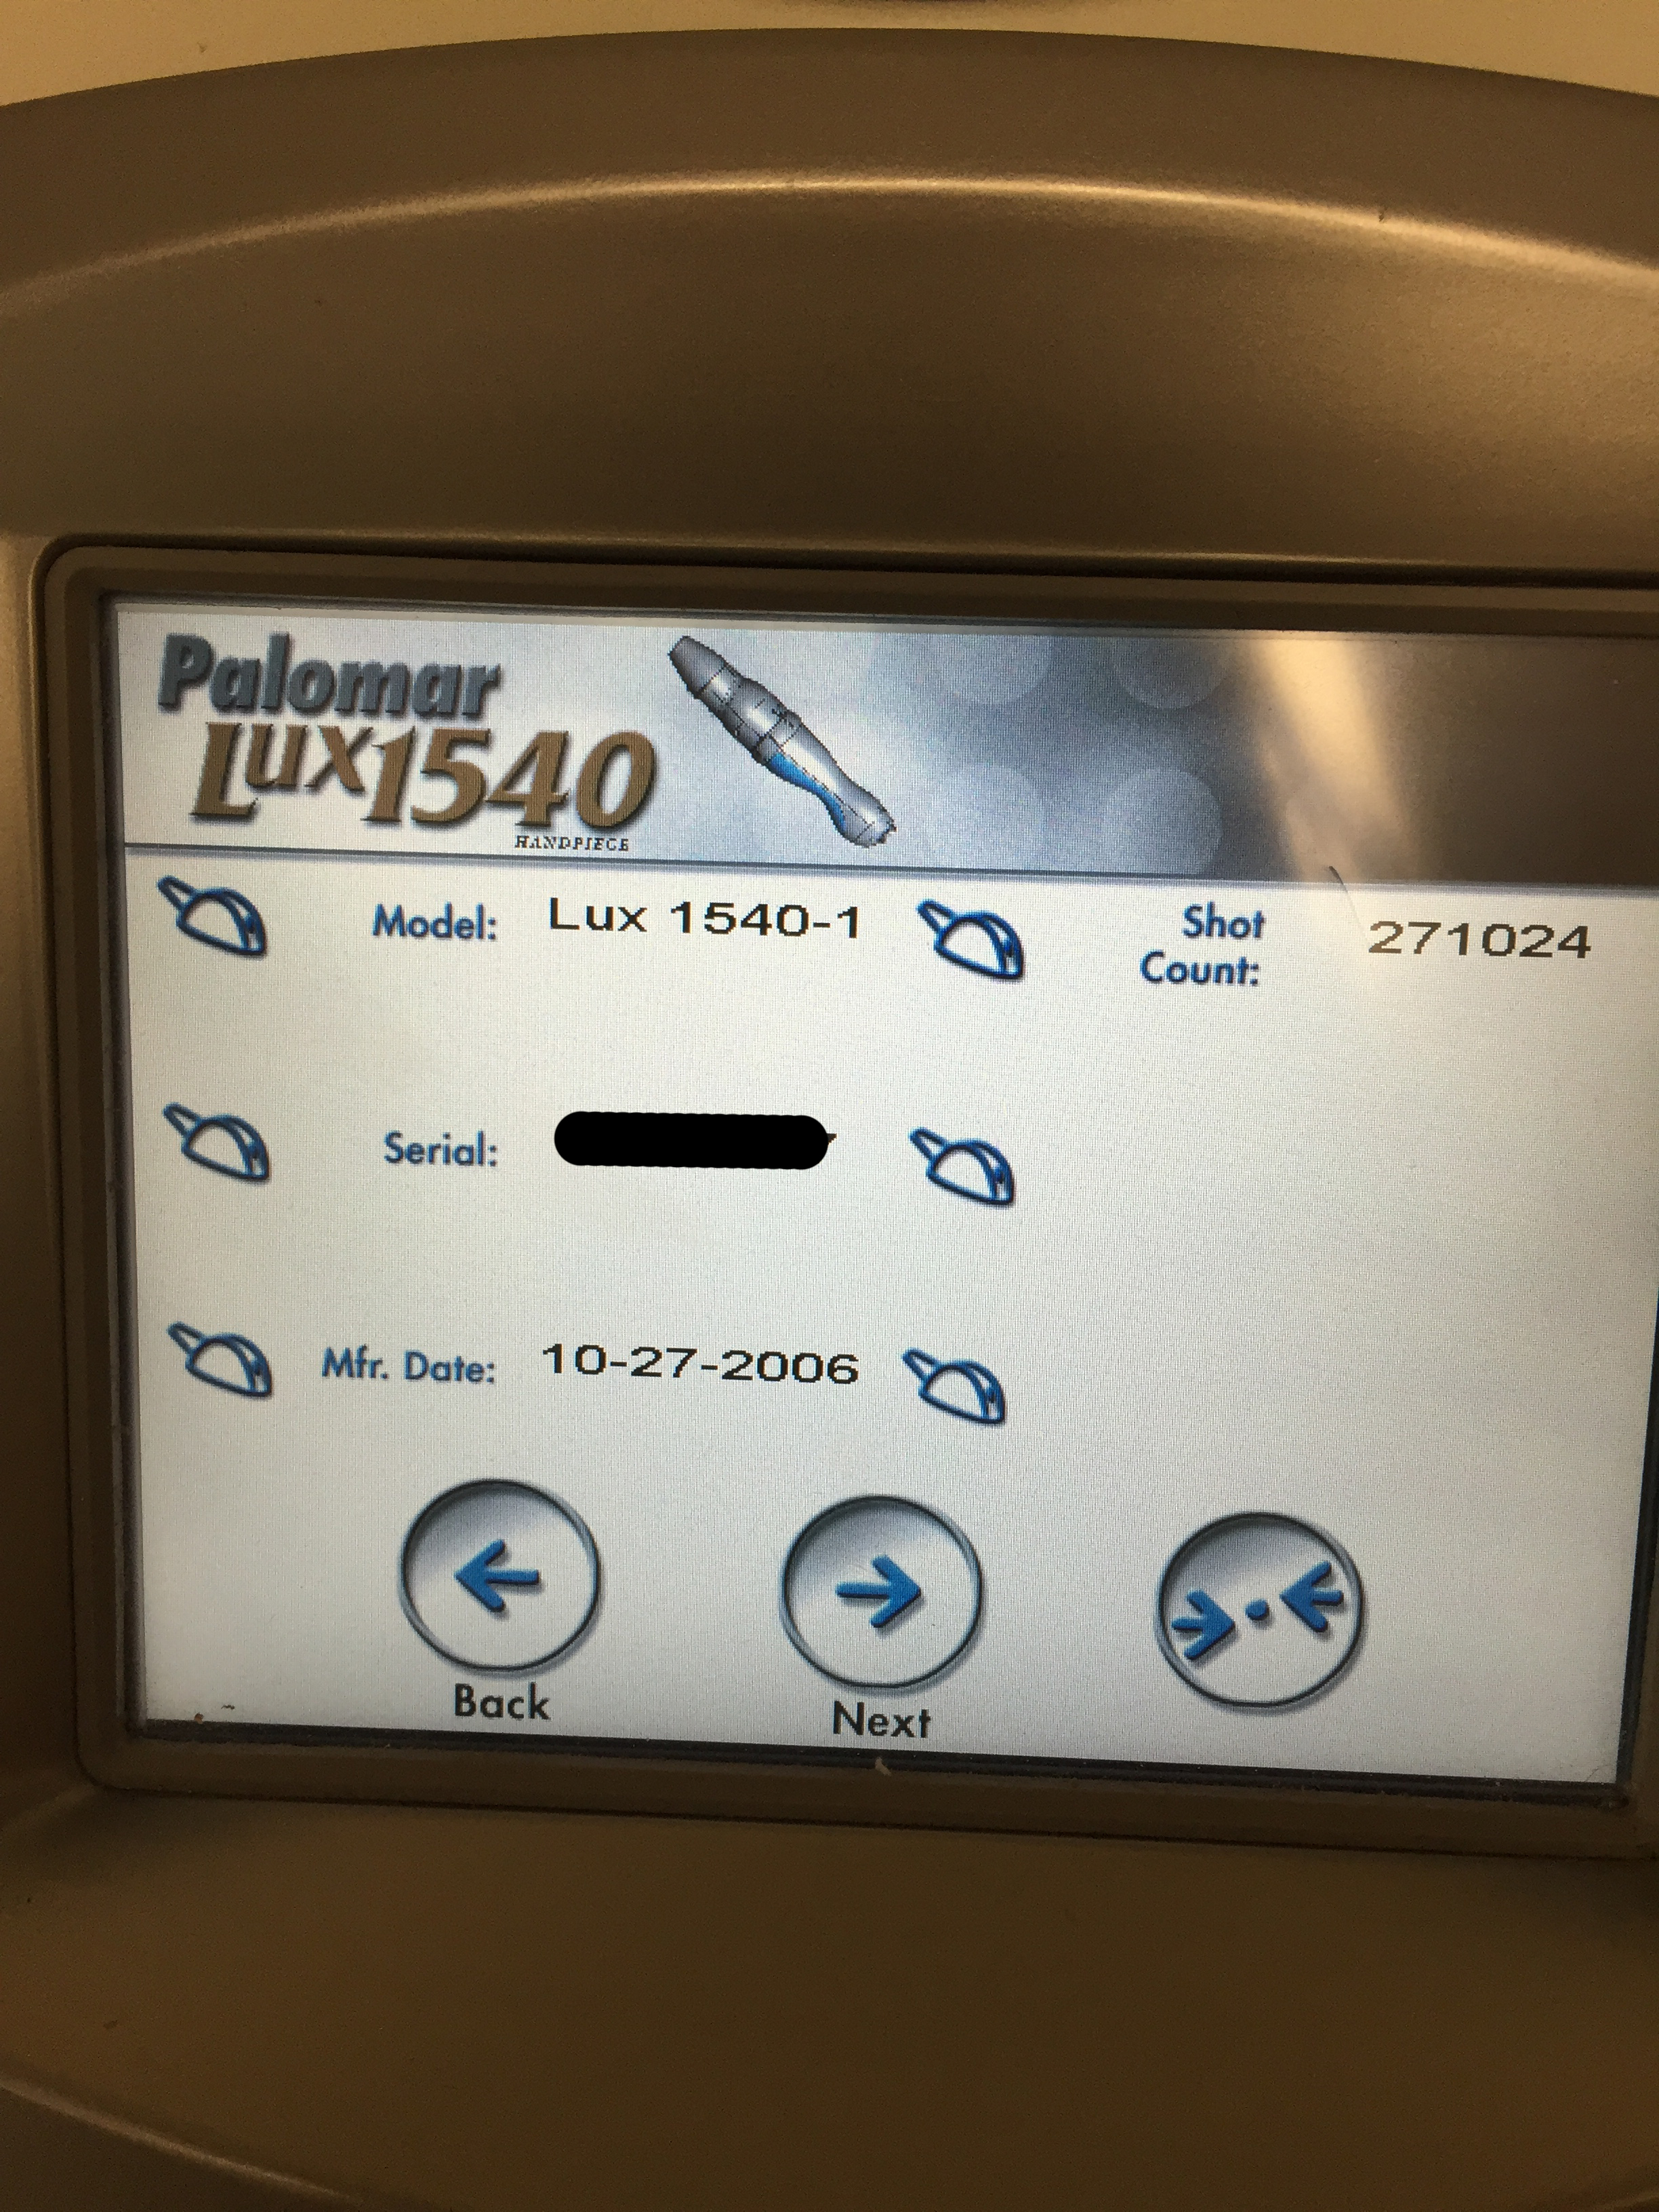 2008 Palomar Starlux 500 with 4 Handpieces: LuxRs, LuxY, MaxG, Lux1540